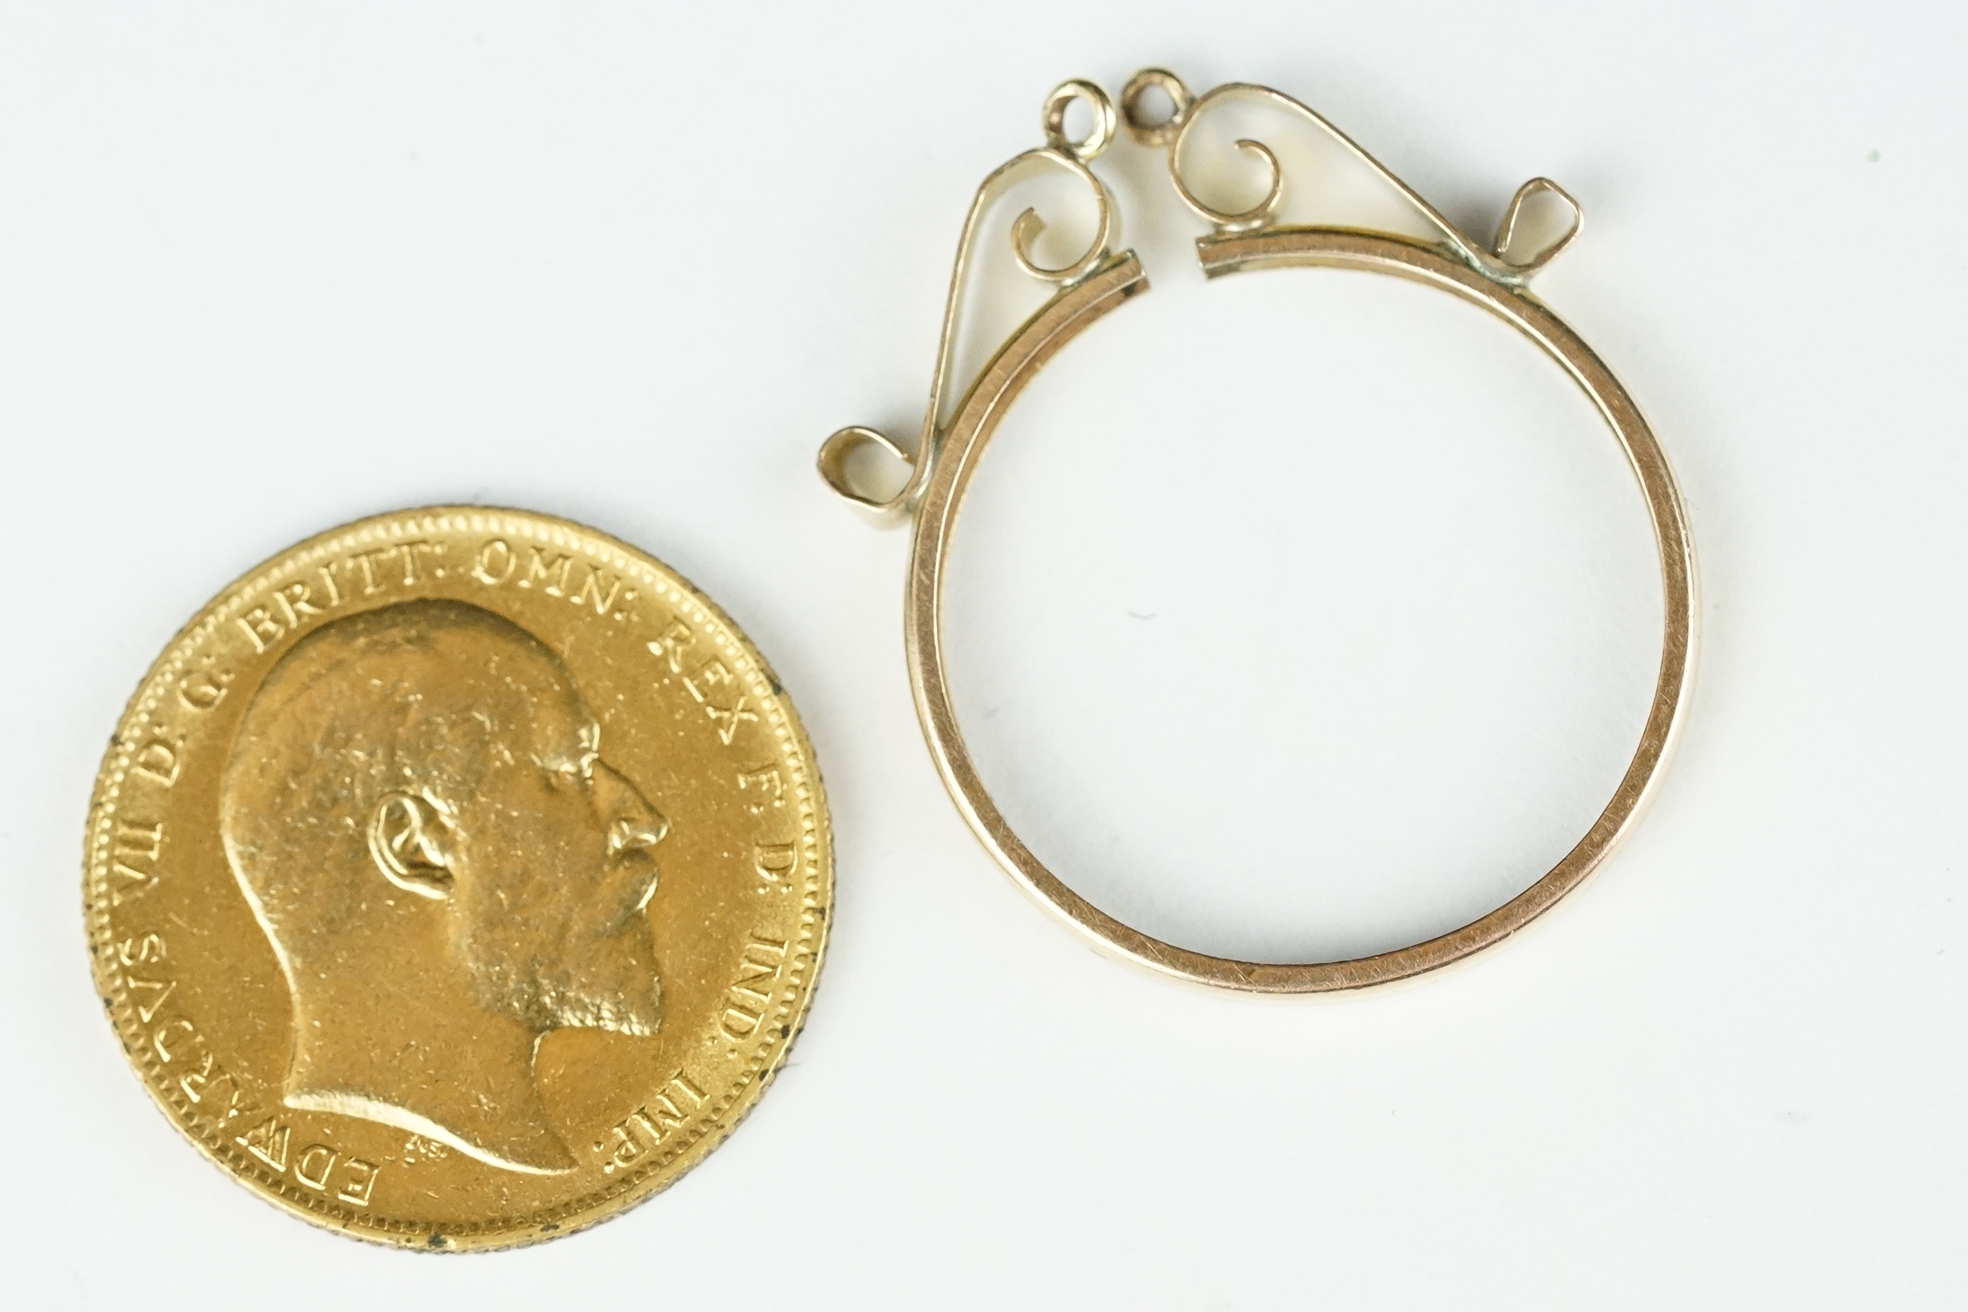 A British King Edward VII 1903 gold full sovereign coin mounted within a 9ct gold mount. - Image 6 of 8